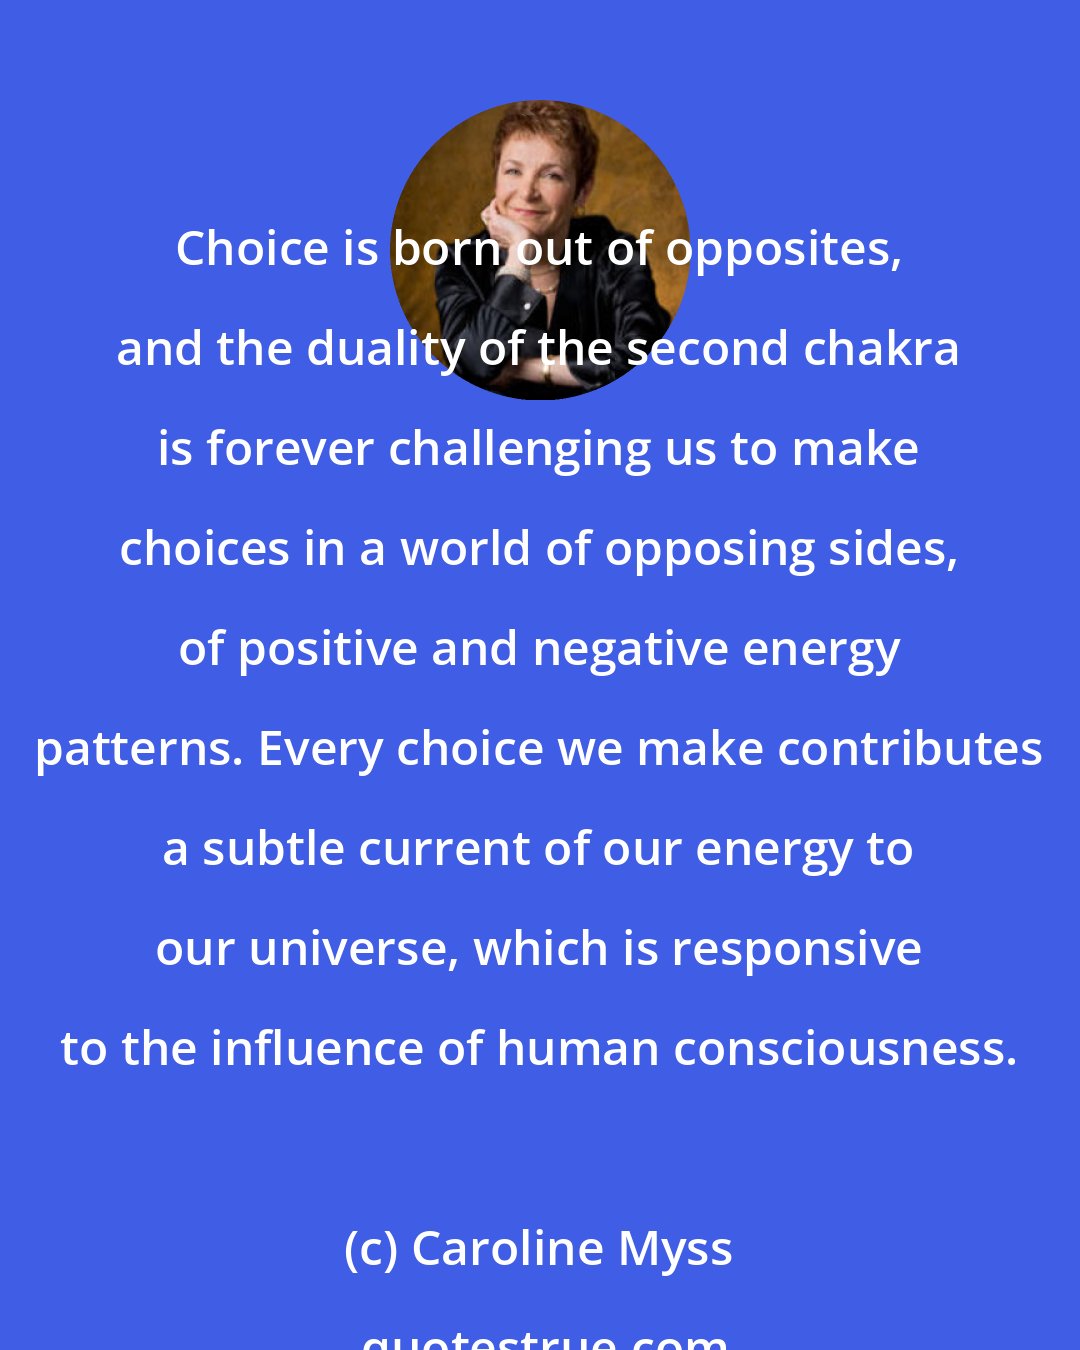 Caroline Myss: Choice is born out of opposites, and the duality of the second chakra is forever challenging us to make choices in a world of opposing sides, of positive and negative energy patterns. Every choice we make contributes a subtle current of our energy to our universe, which is responsive to the influence of human consciousness.